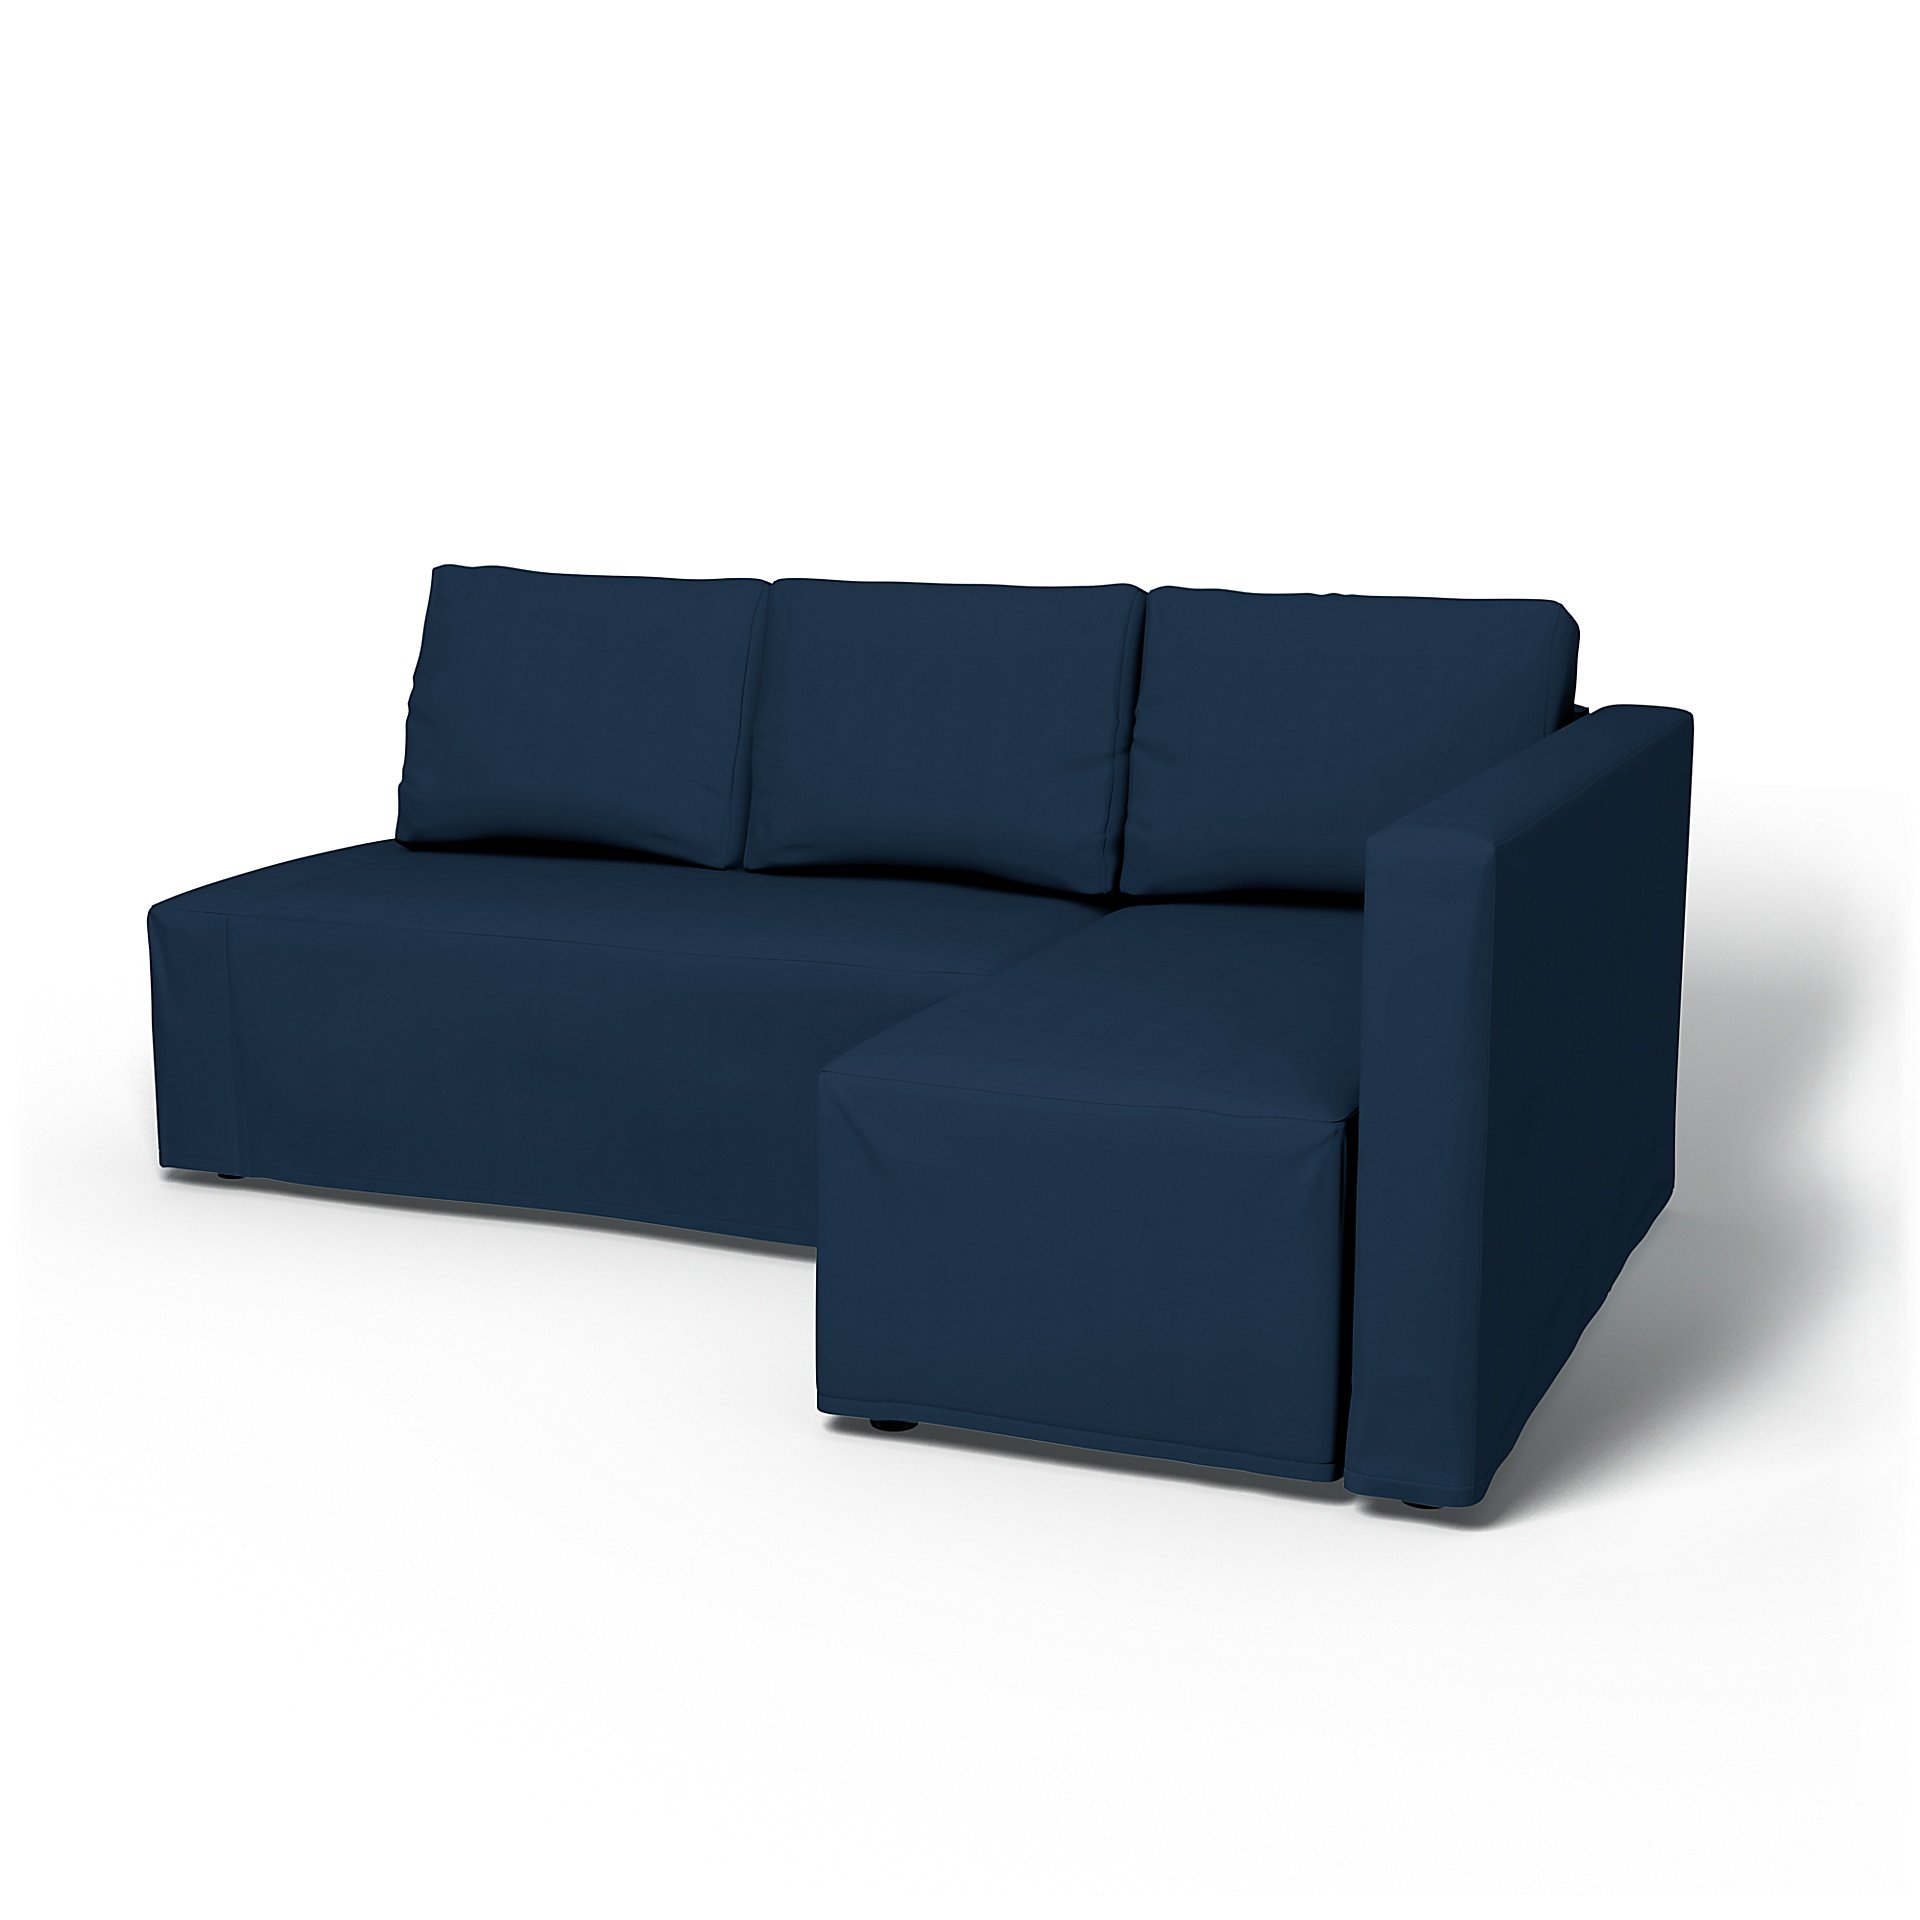 IKEA - Friheten Sofa Bed with Right Chaise Cover, Deep Navy Blue, Cotton - Bemz